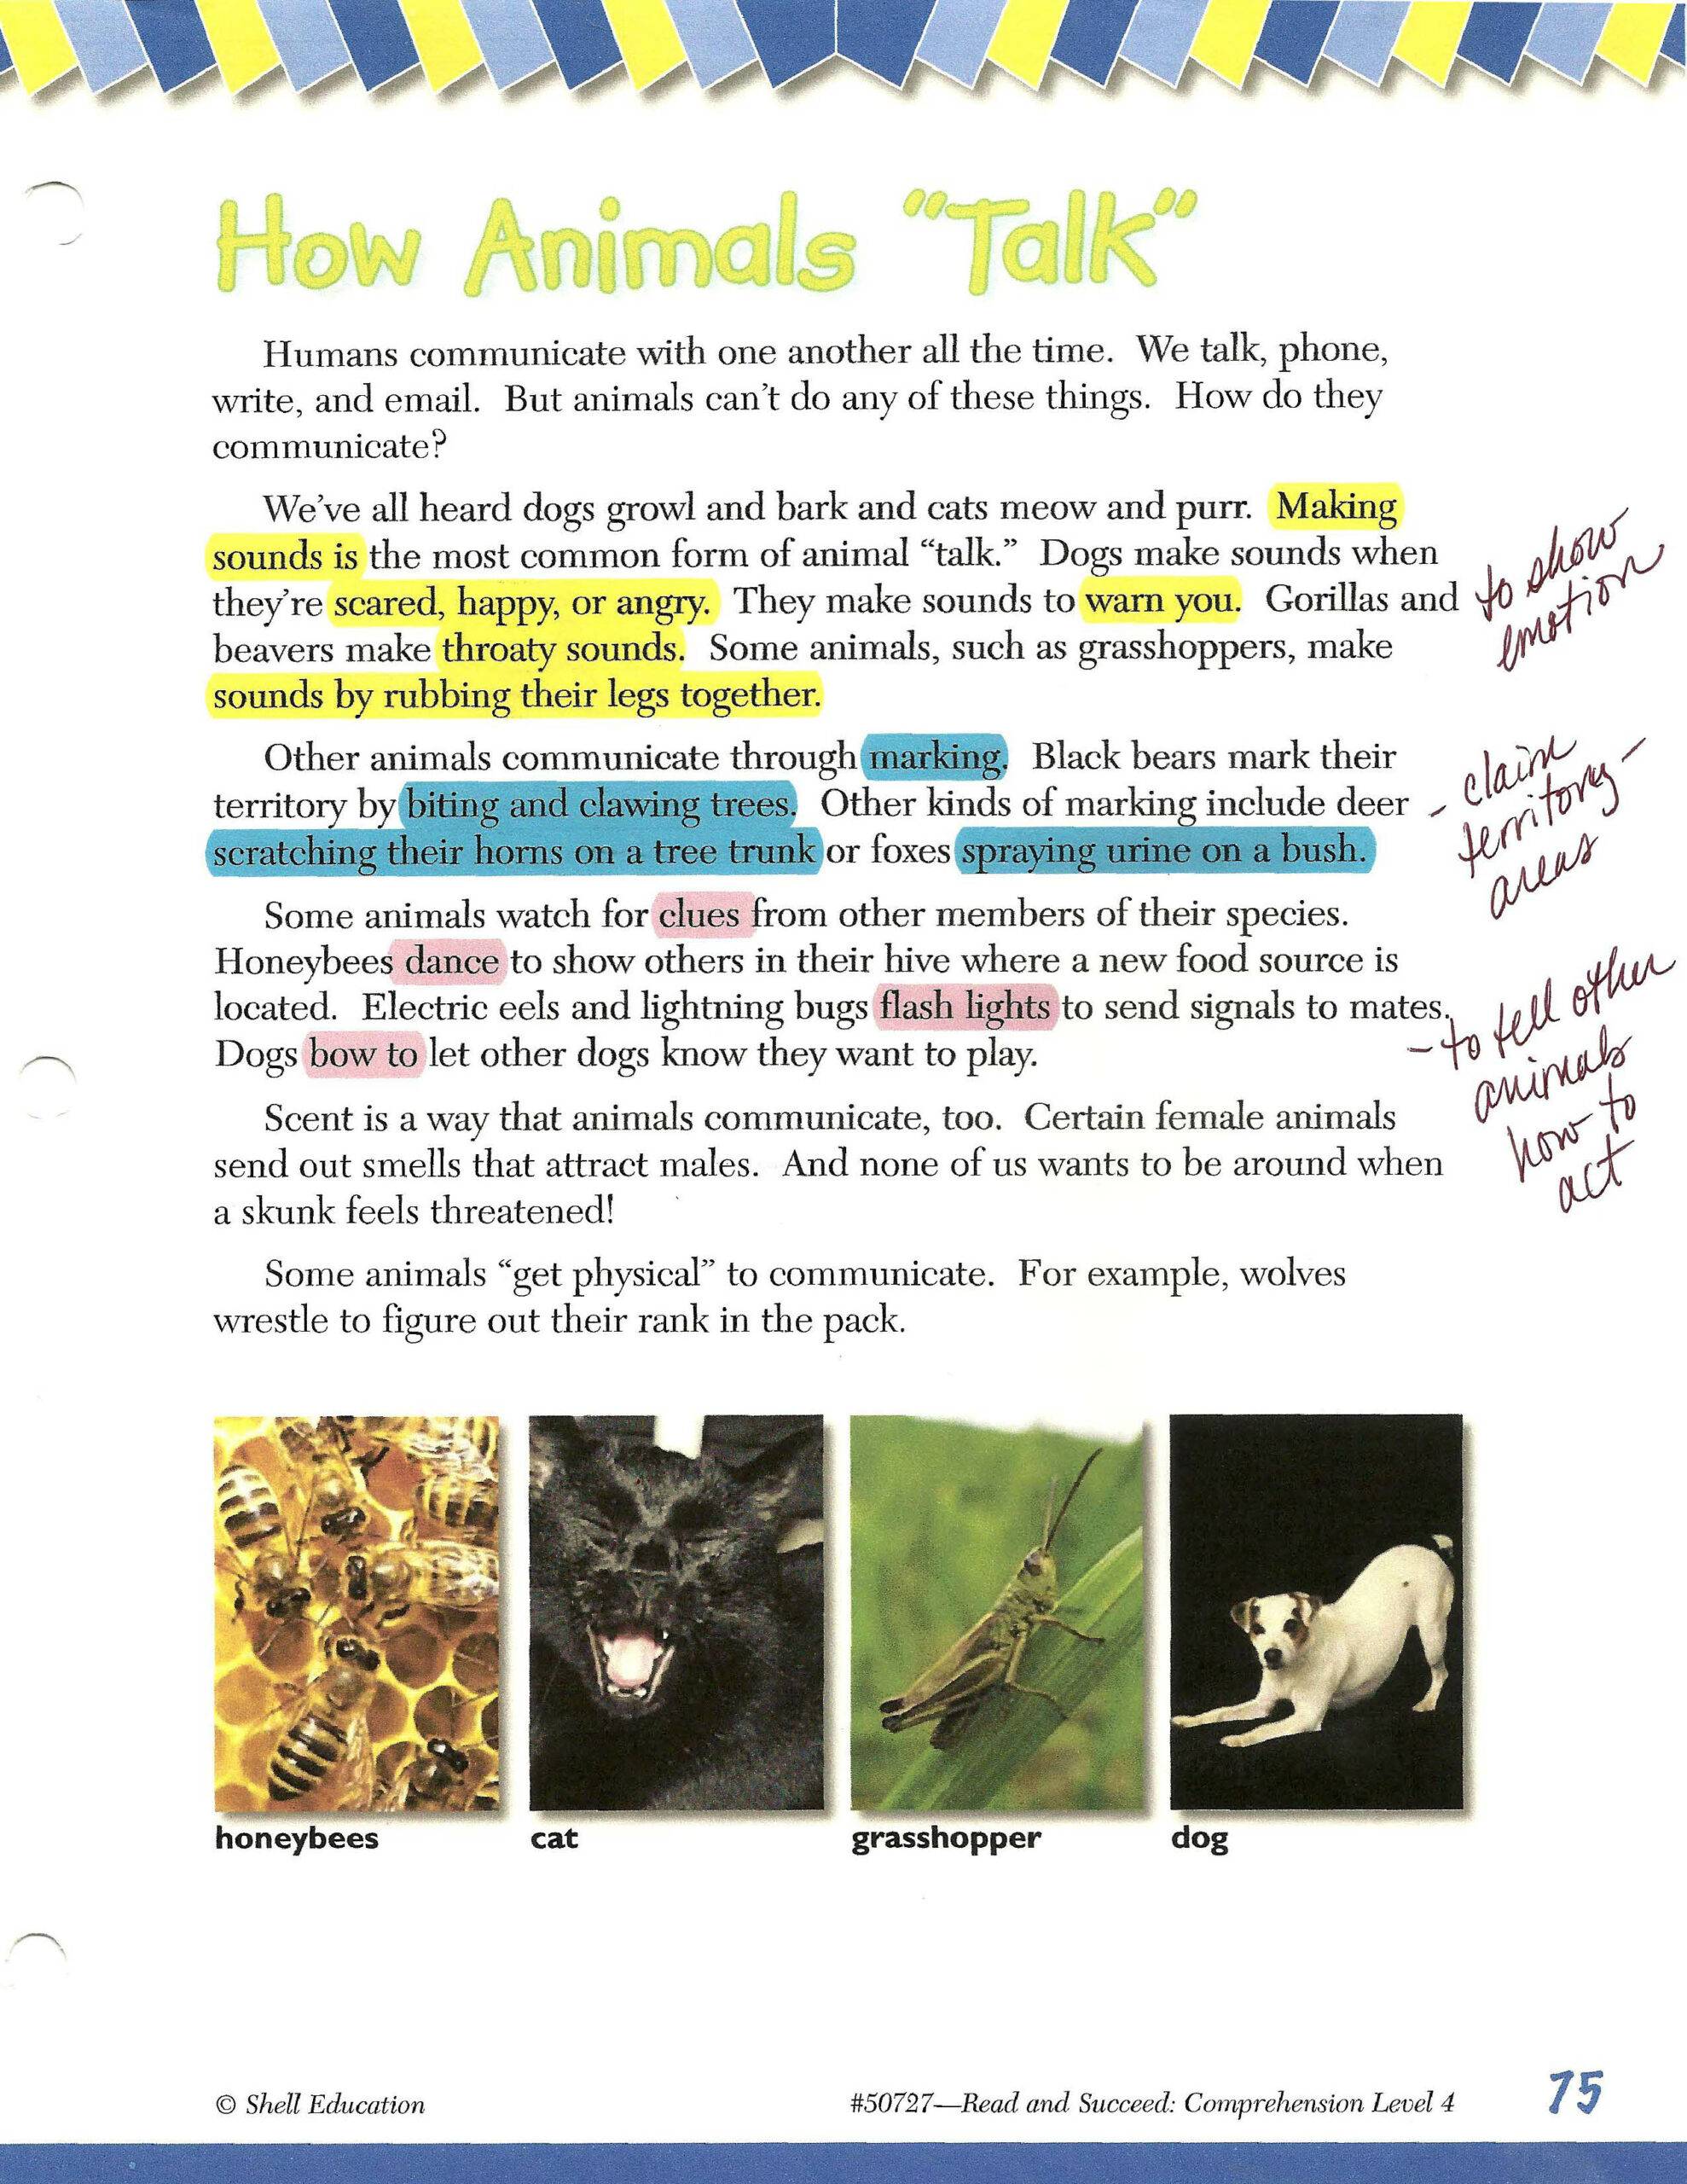 "How Animals Talk" Article from Read and Succeed: Comprehension